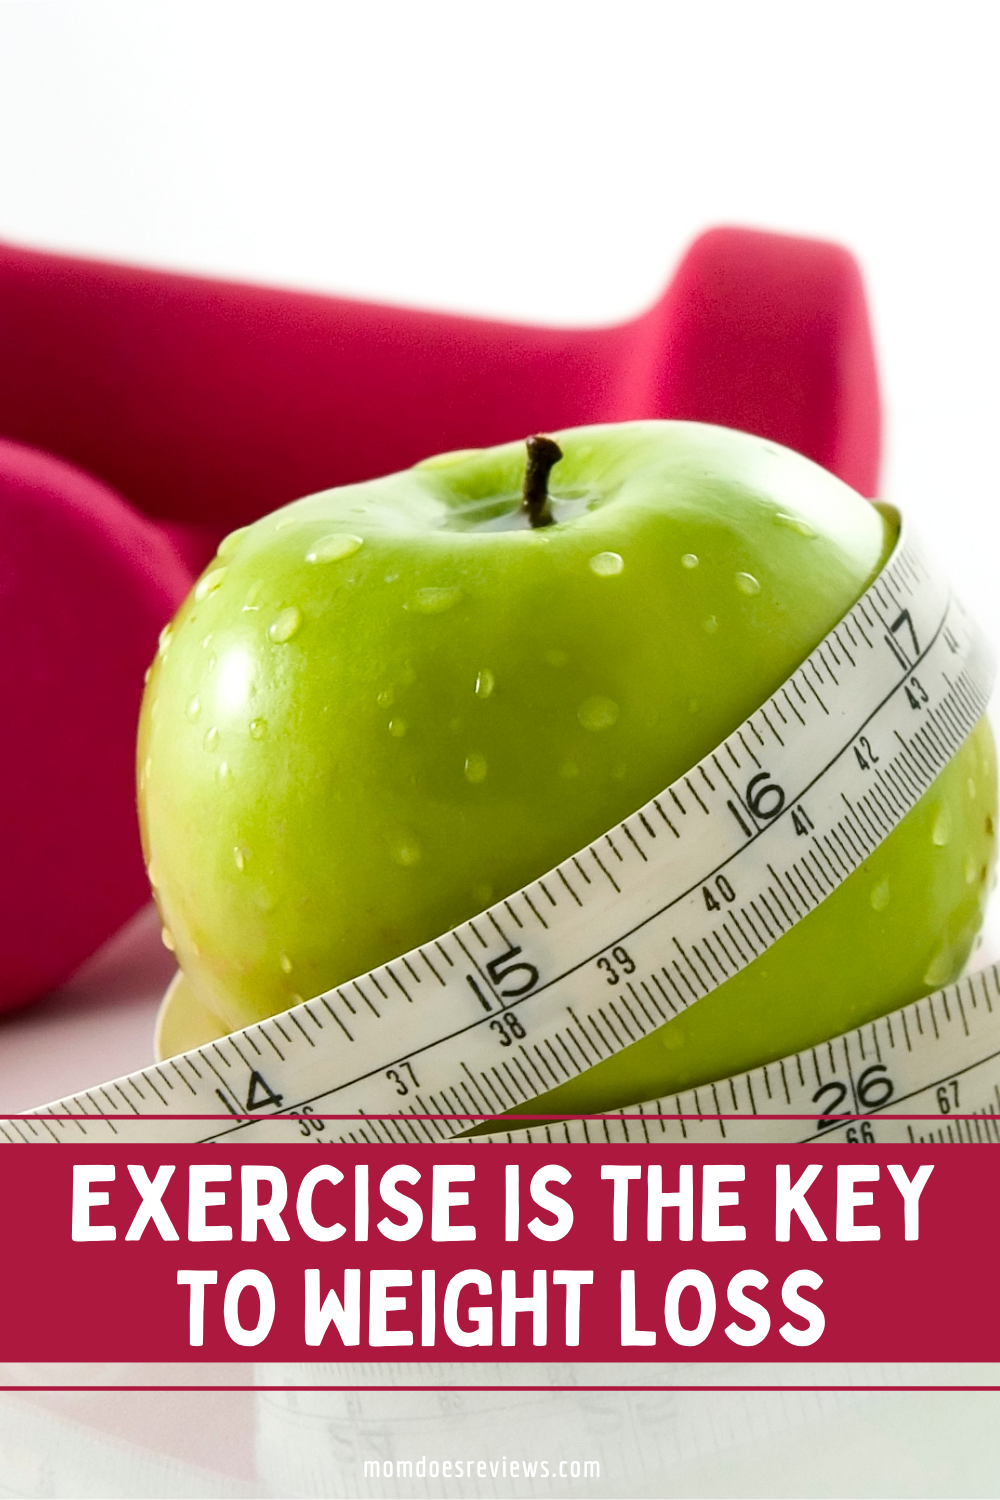 Exercise Is Key to Weight Loss and Health